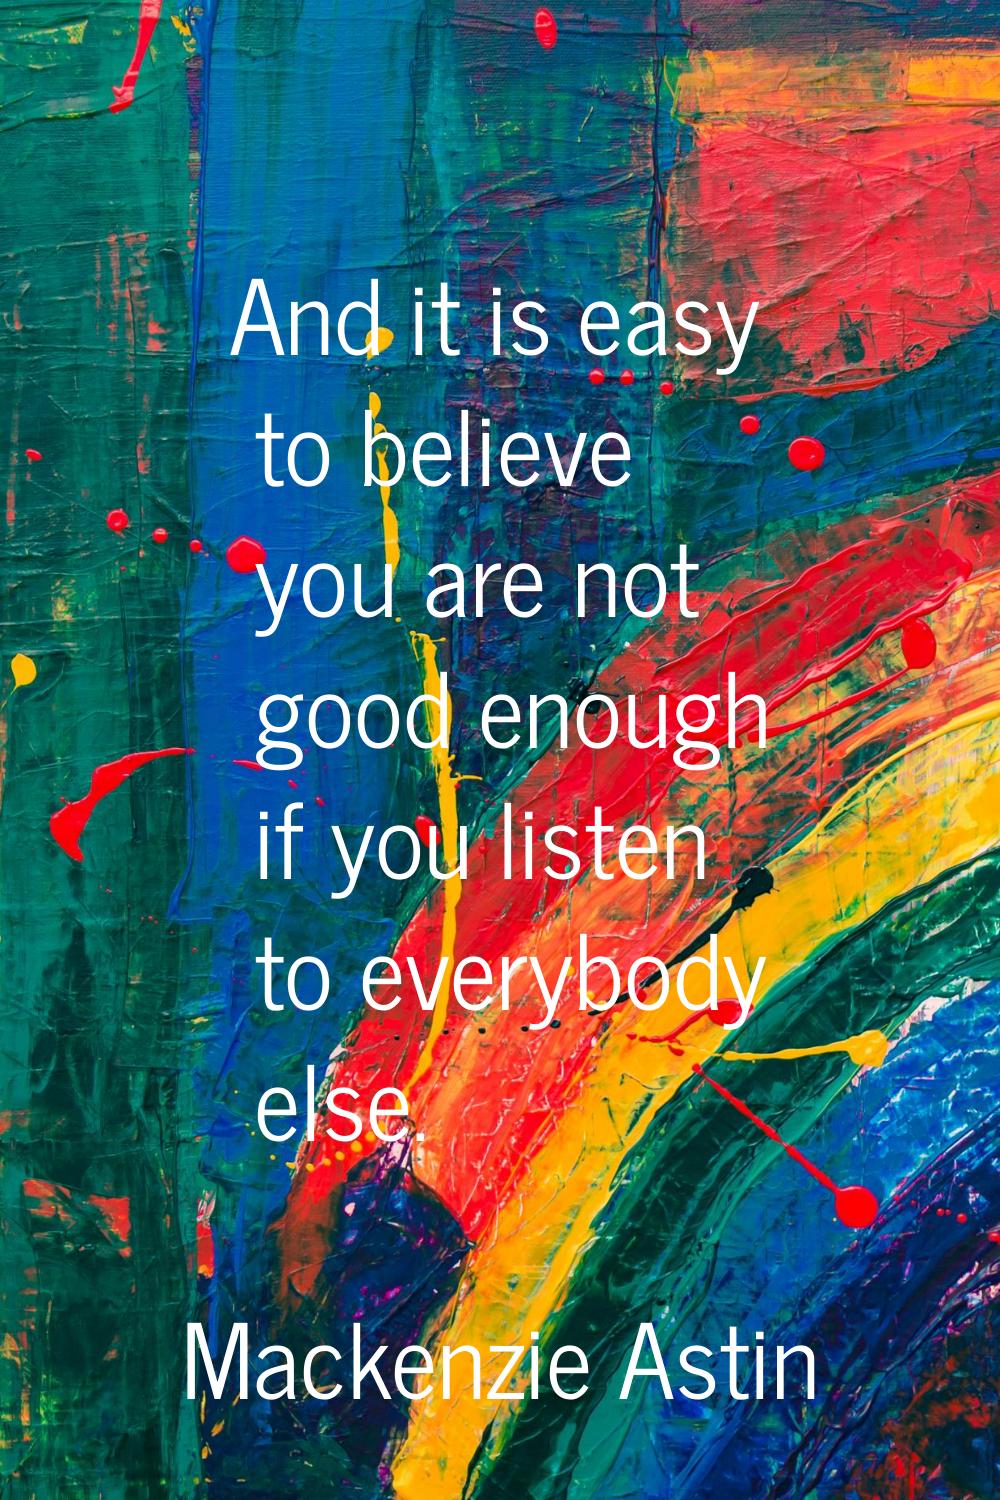 And it is easy to believe you are not good enough if you listen to everybody else.